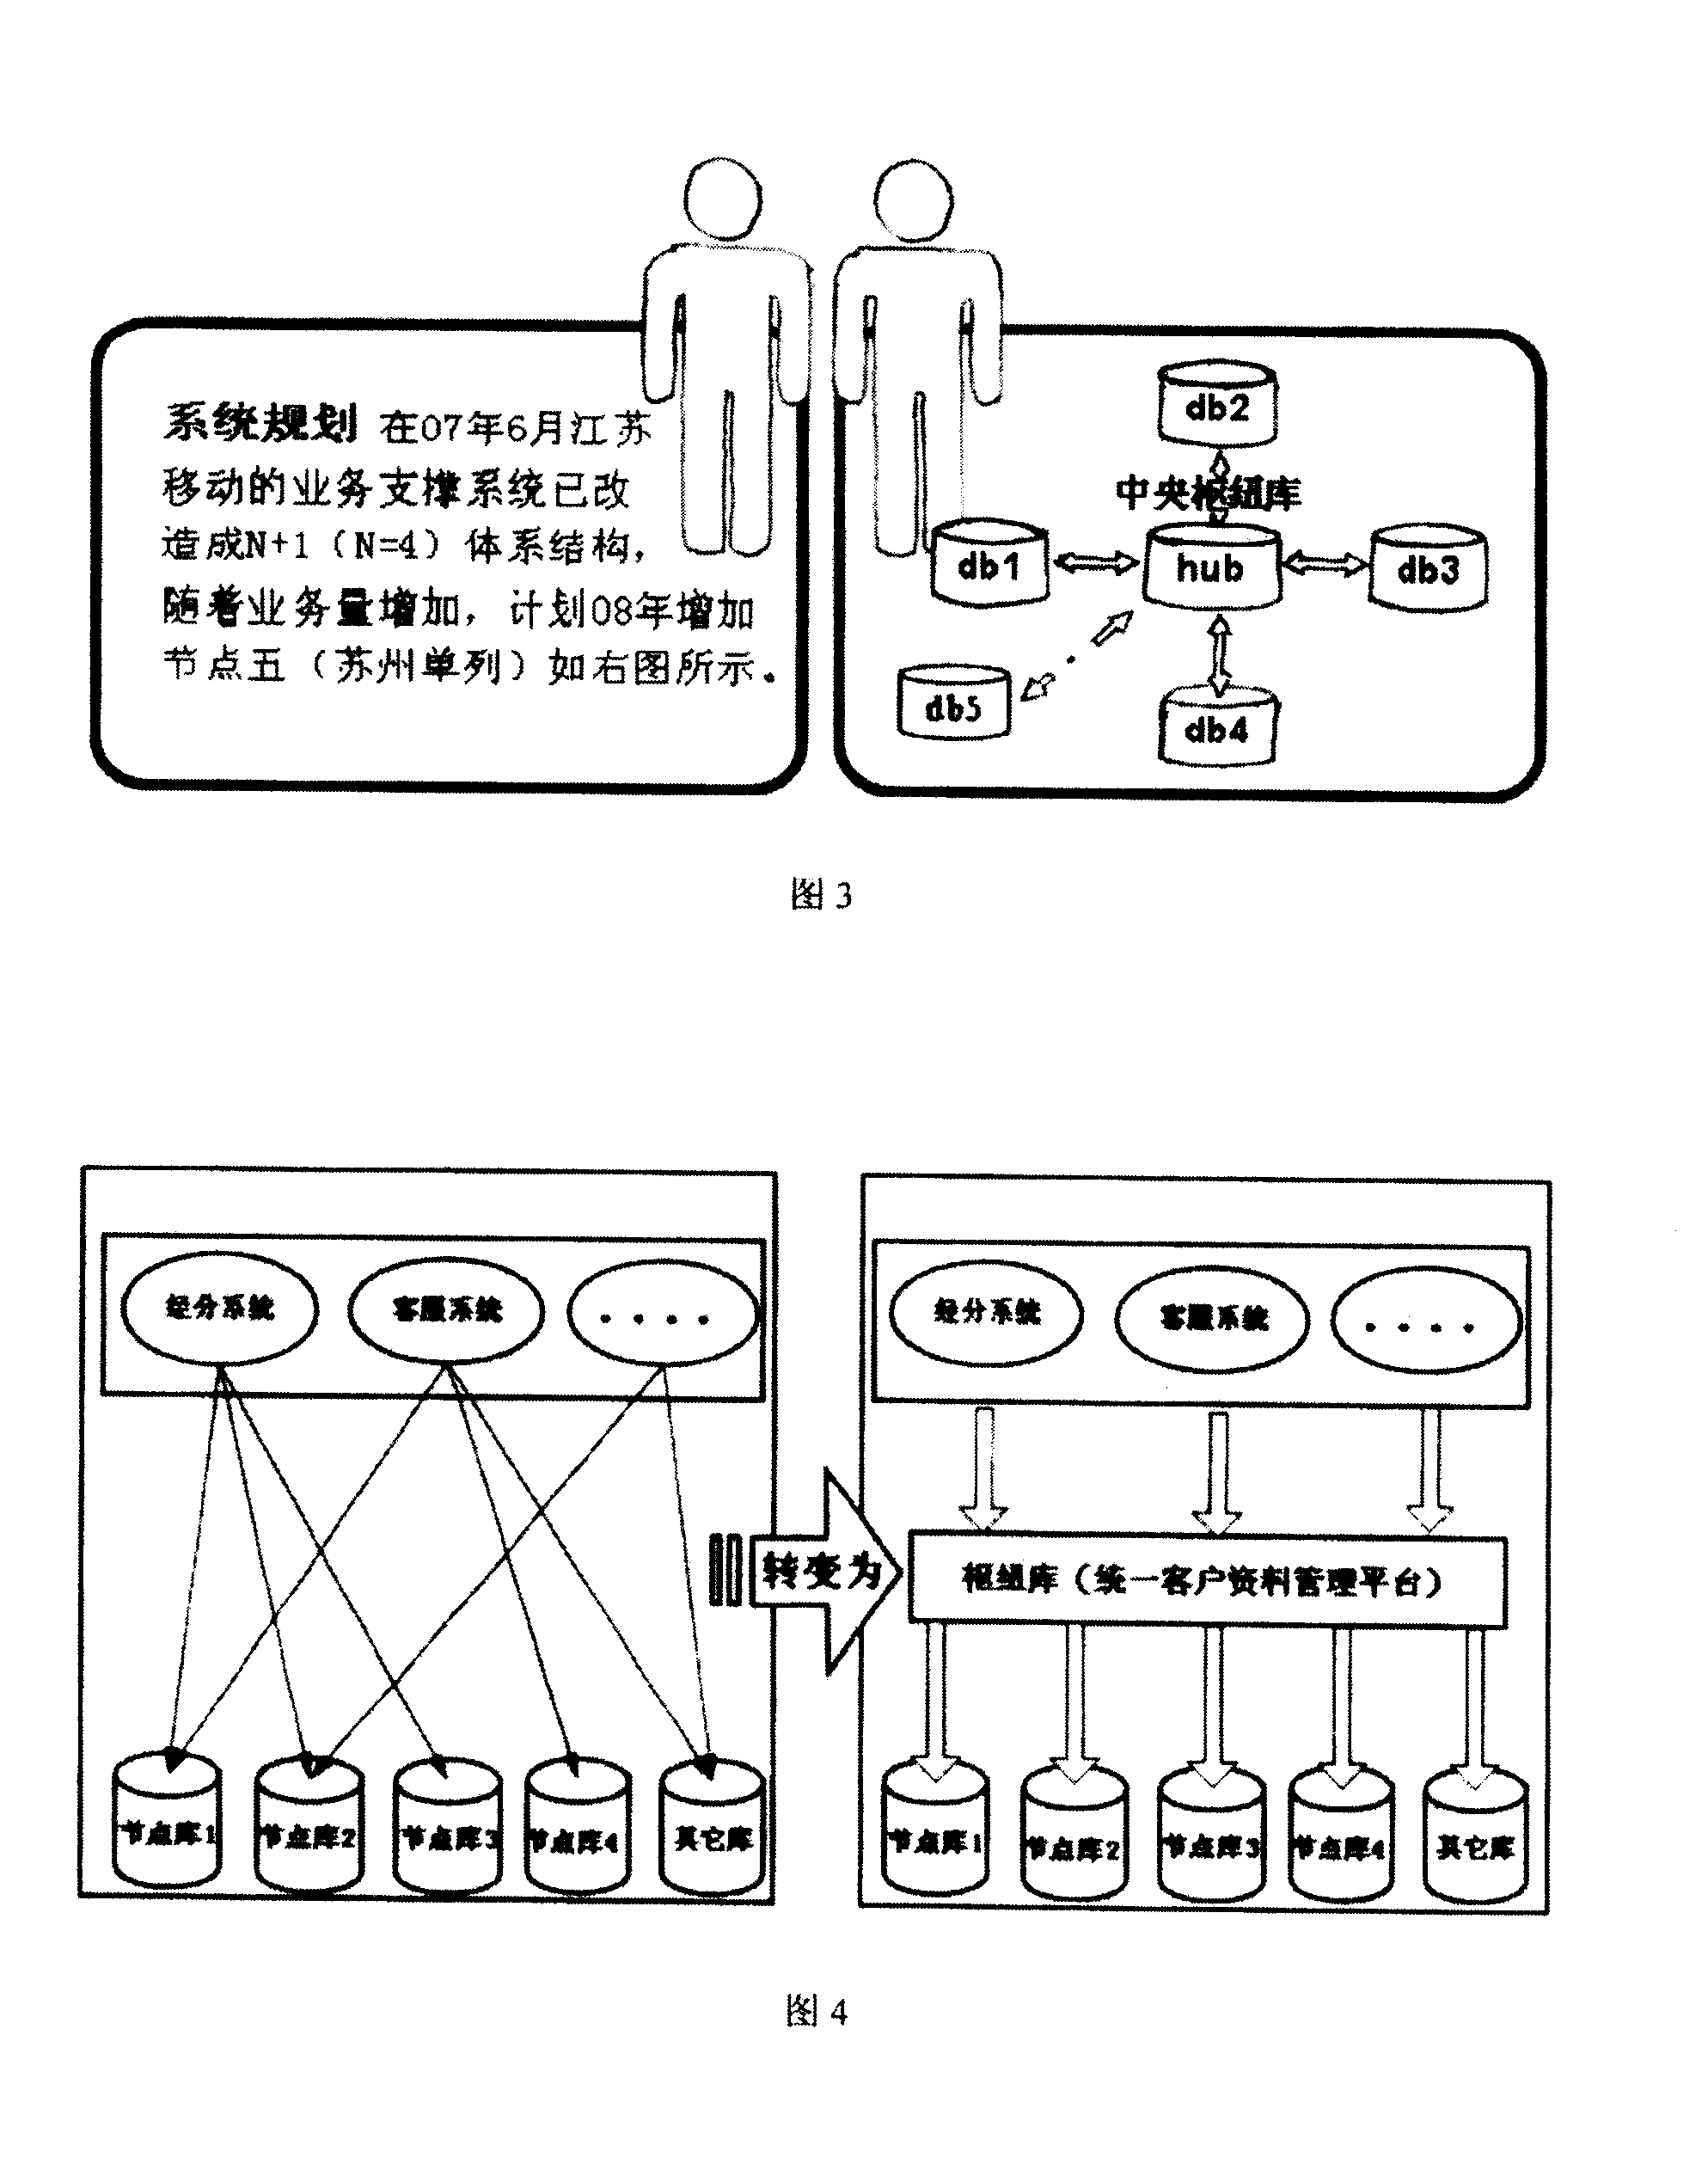 Networking method for data hinge-service supporting system